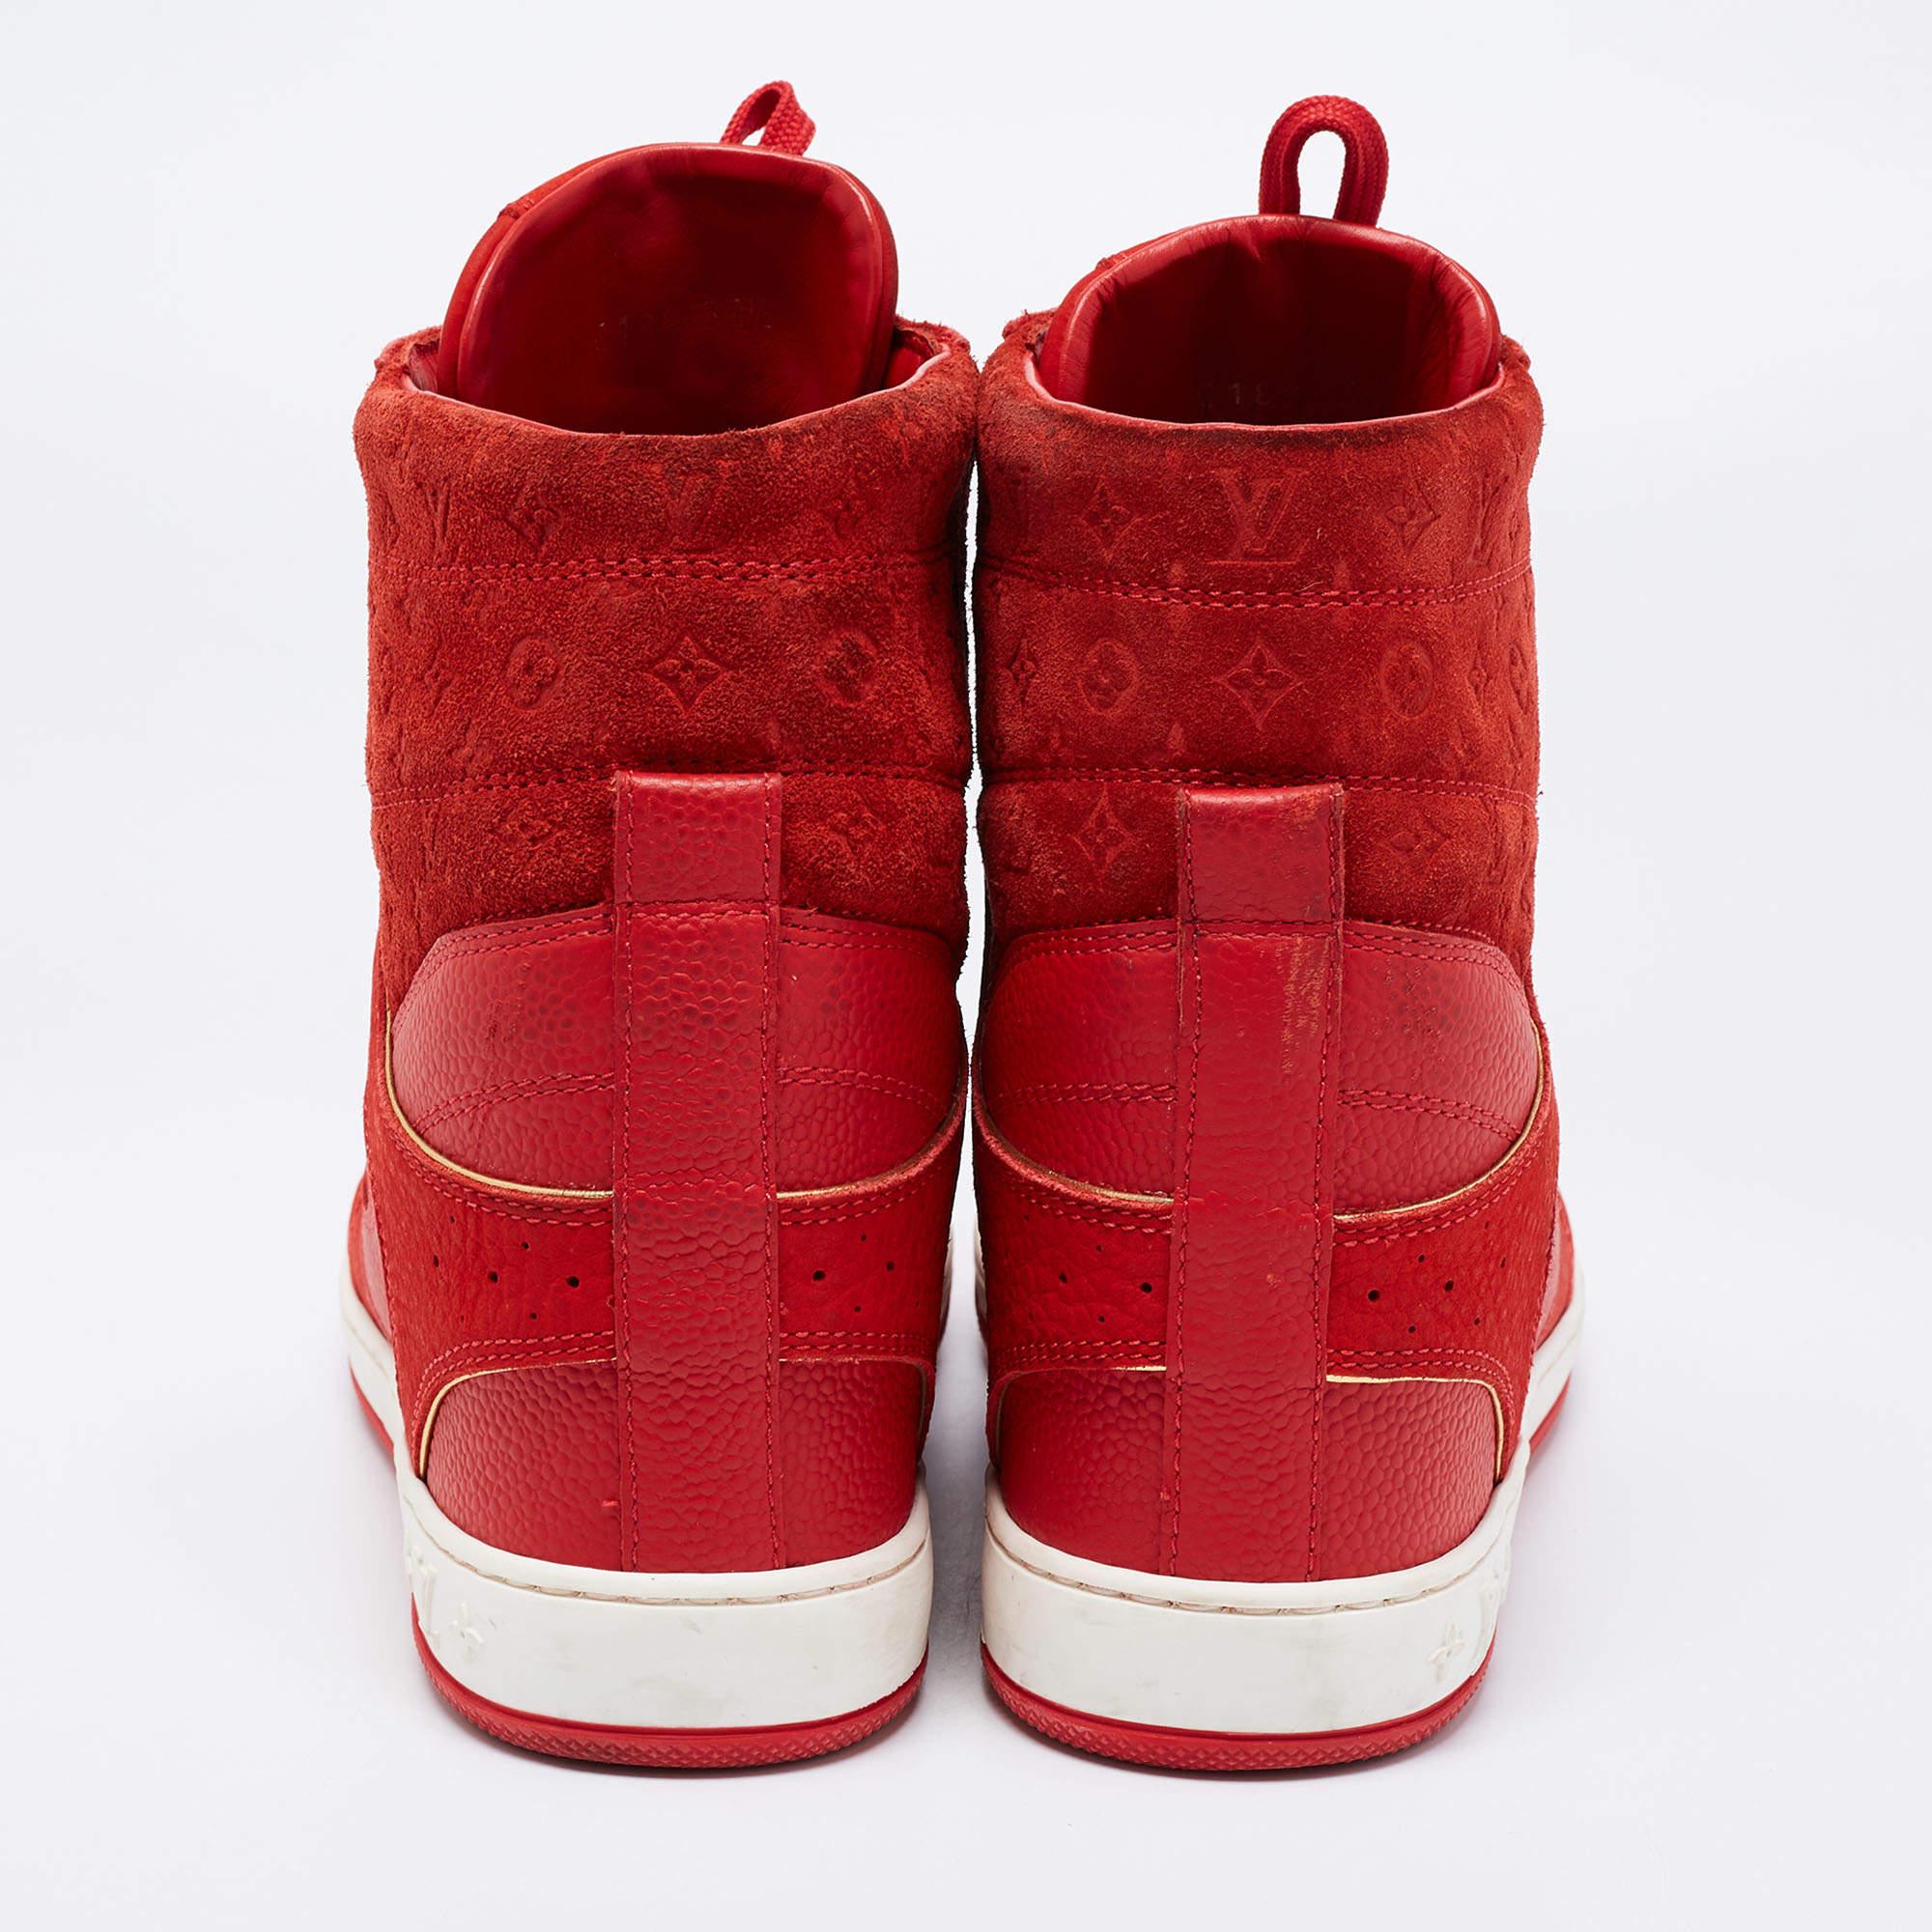 Louis Vuitton Red Leather And Embossed Monogram Suede Millenium Wedge Sneakers S In Good Condition For Sale In Dubai, Al Qouz 2